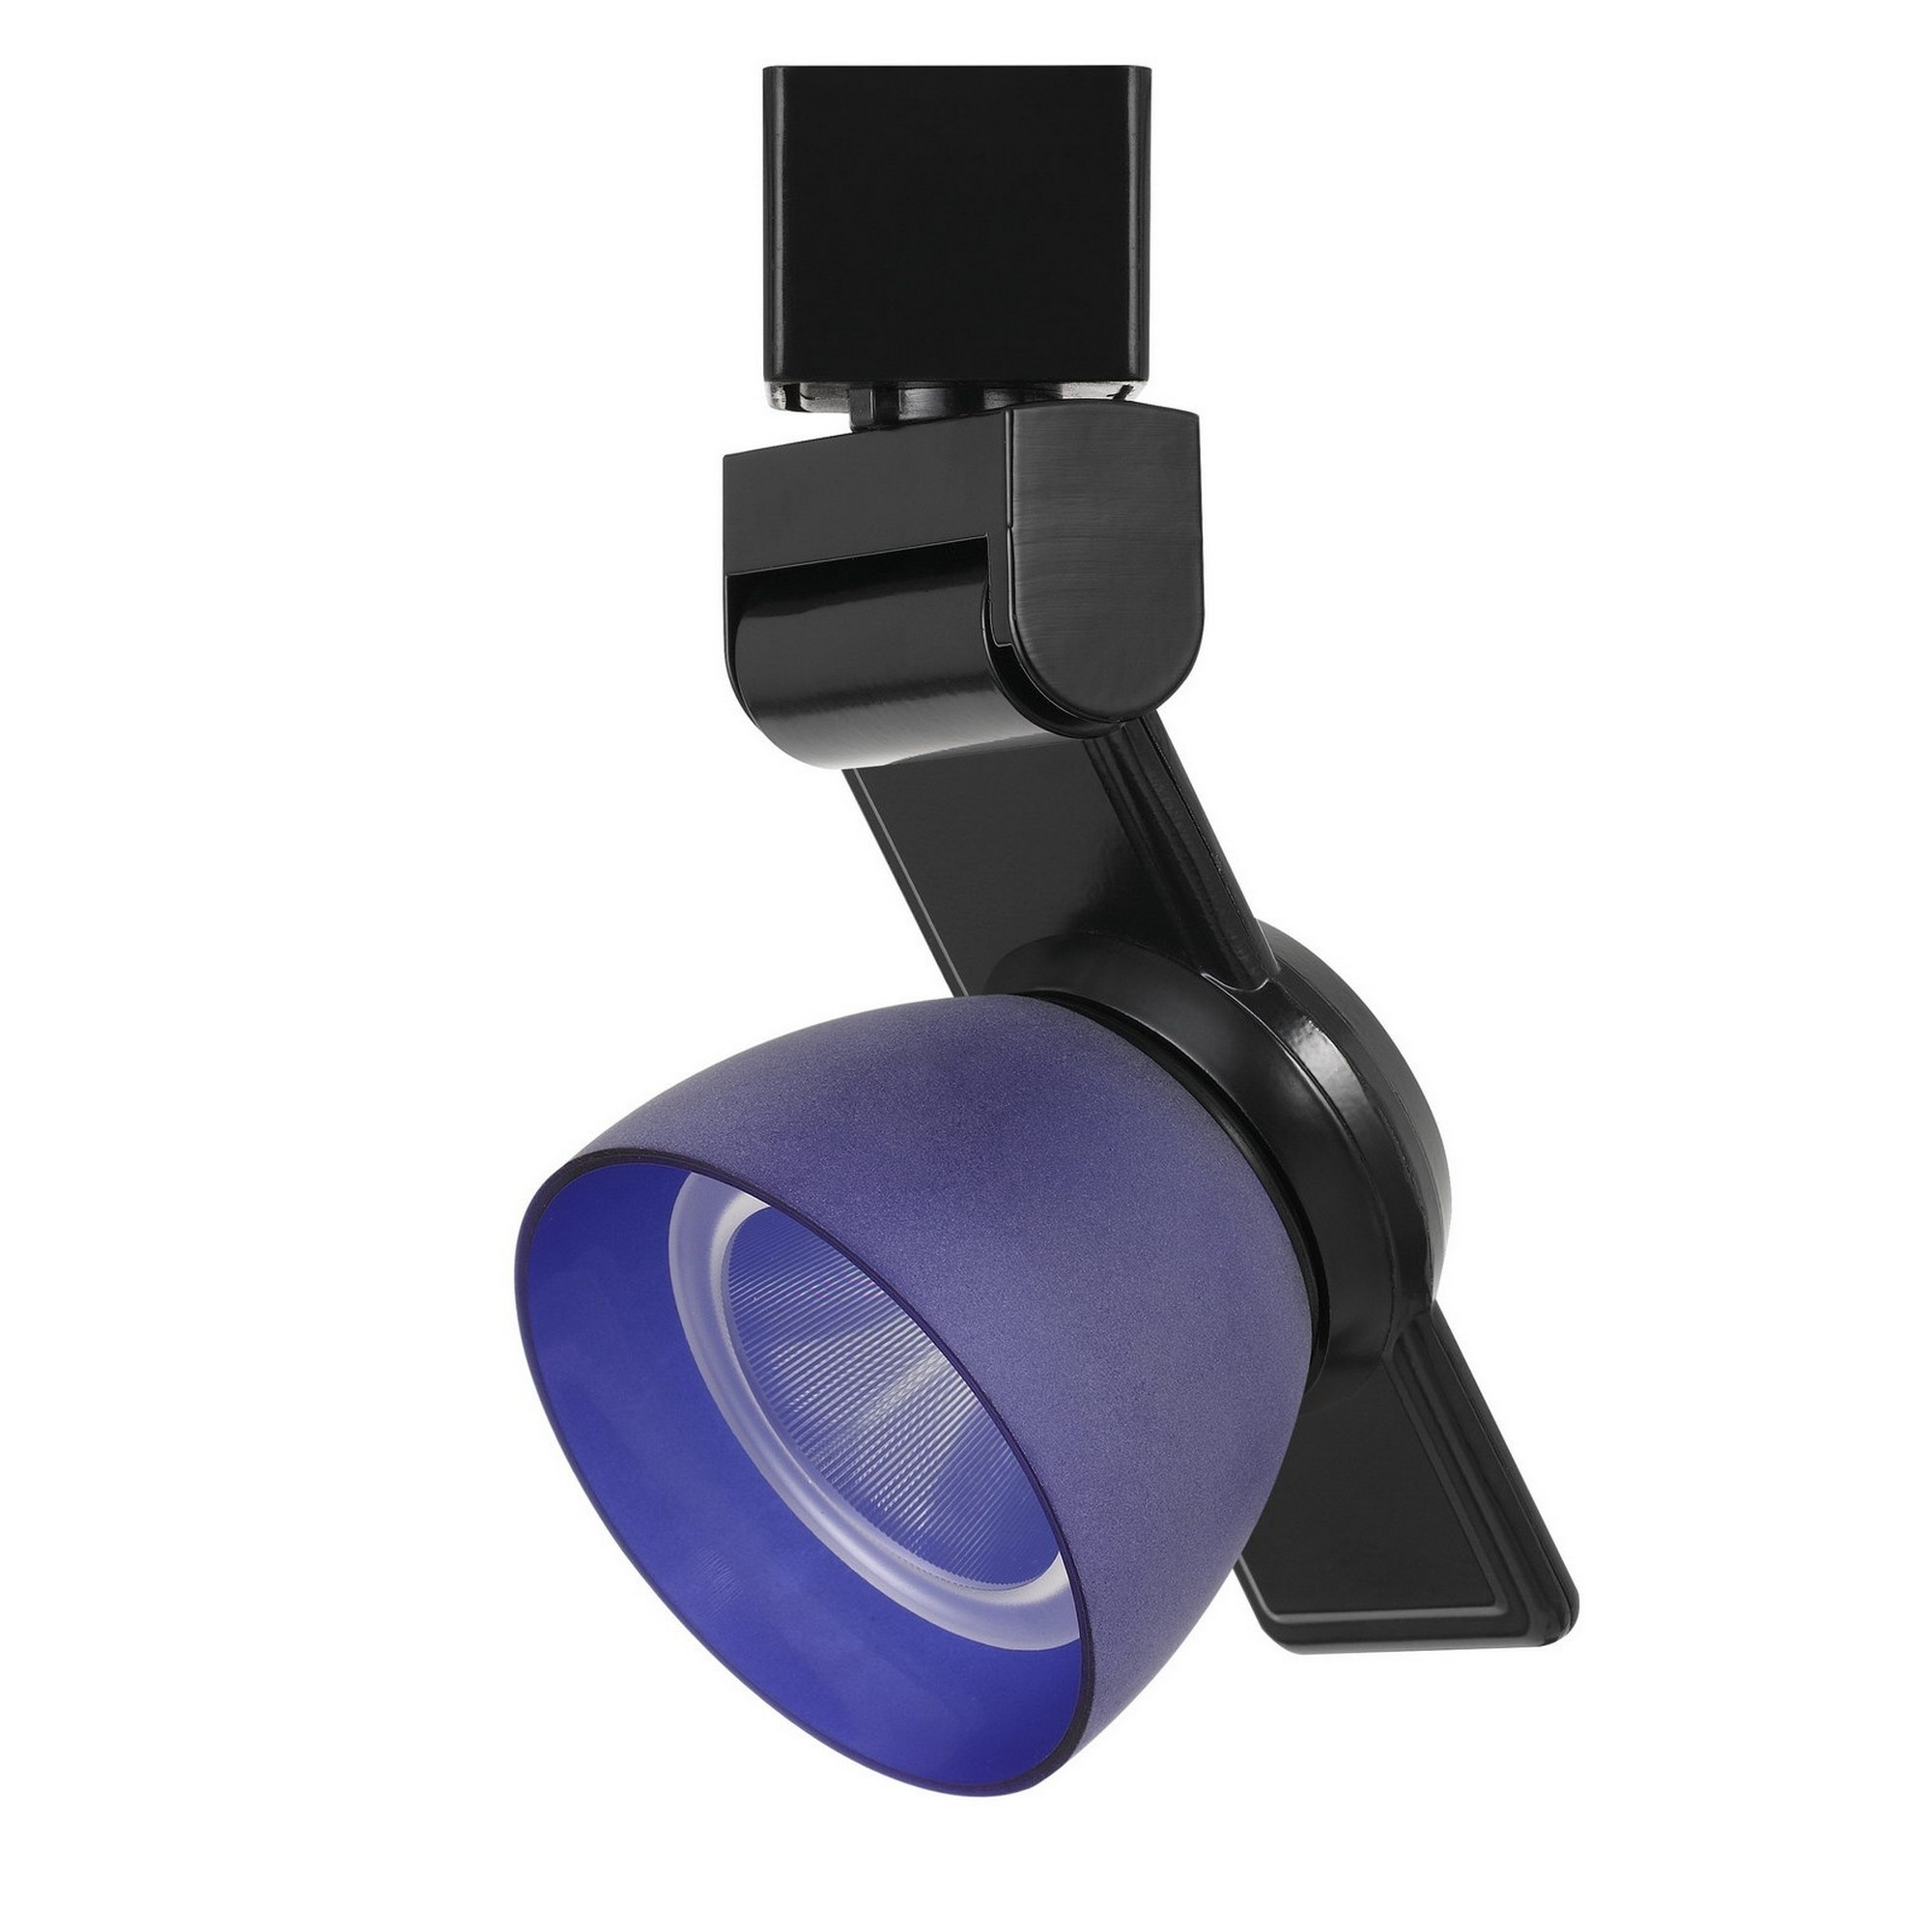 12W Integrated Metal Polycarbonate LED Track Fixture, Black And Blue